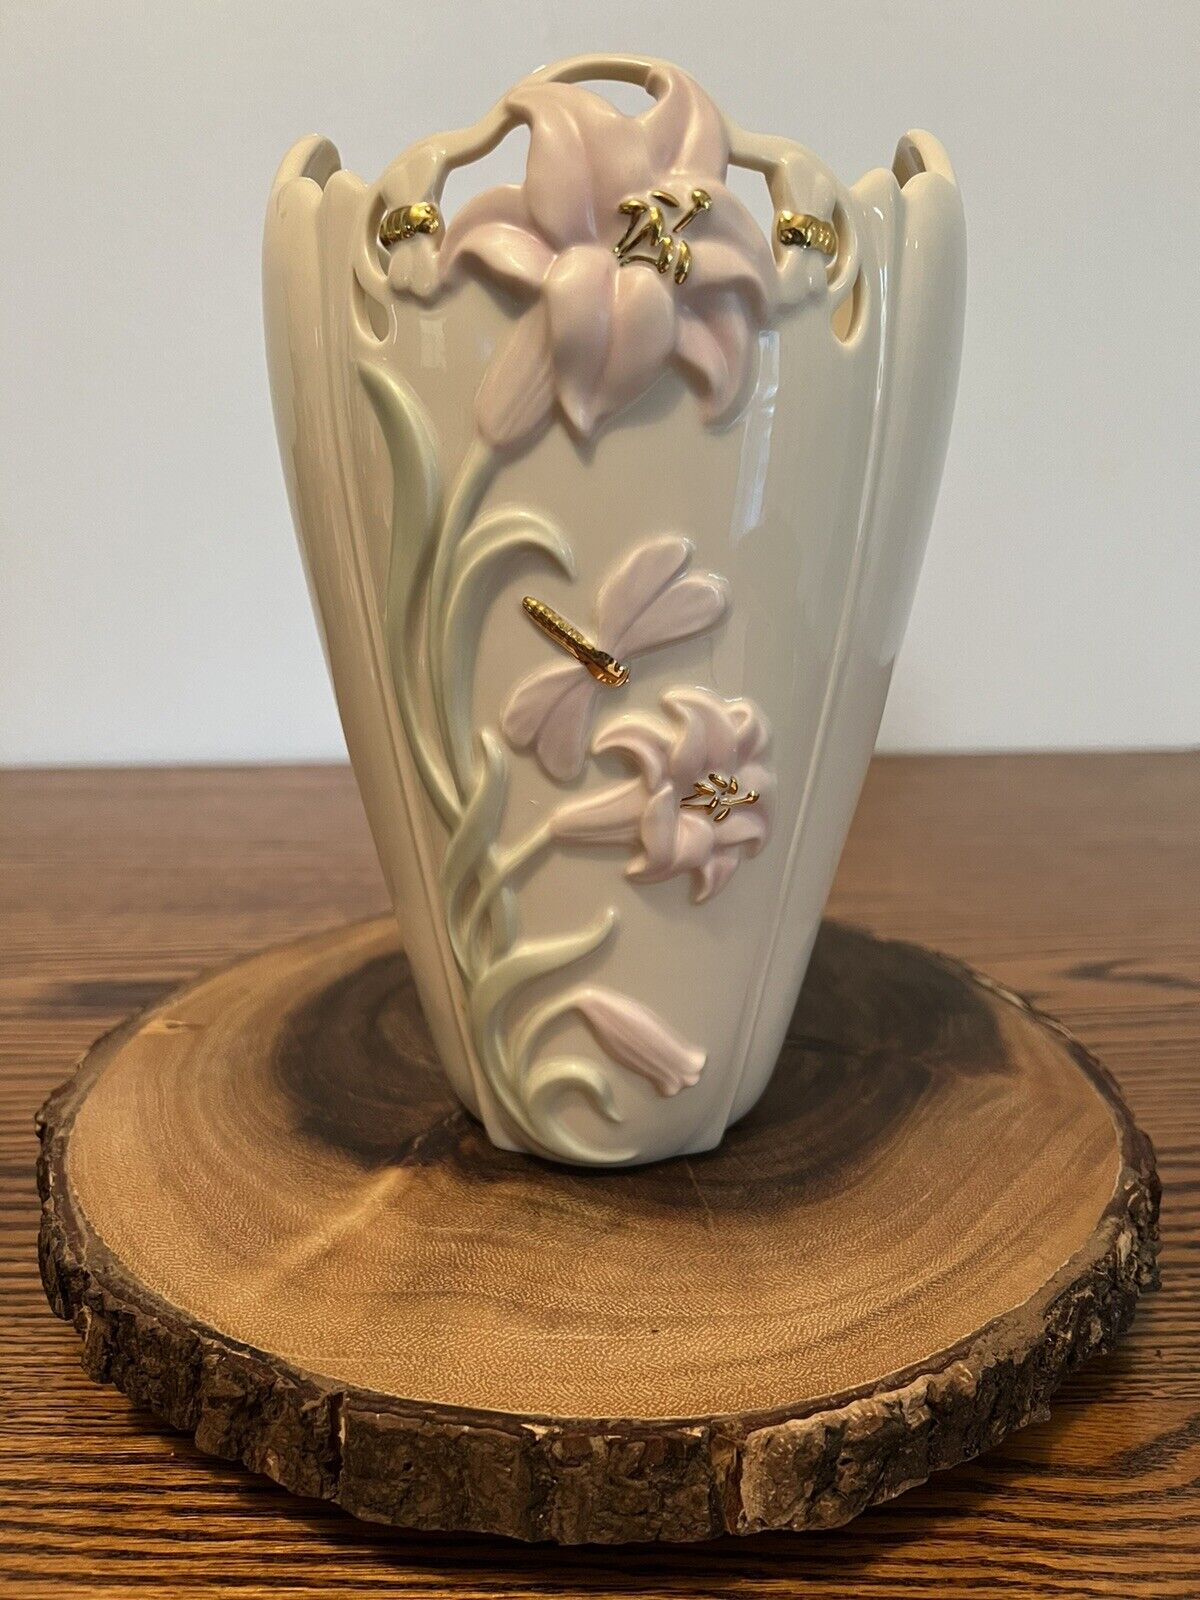 Lenox Ivory Lily Of The Valley Dragonfly Vase 24Kt Gold Accent Flowers 9”H